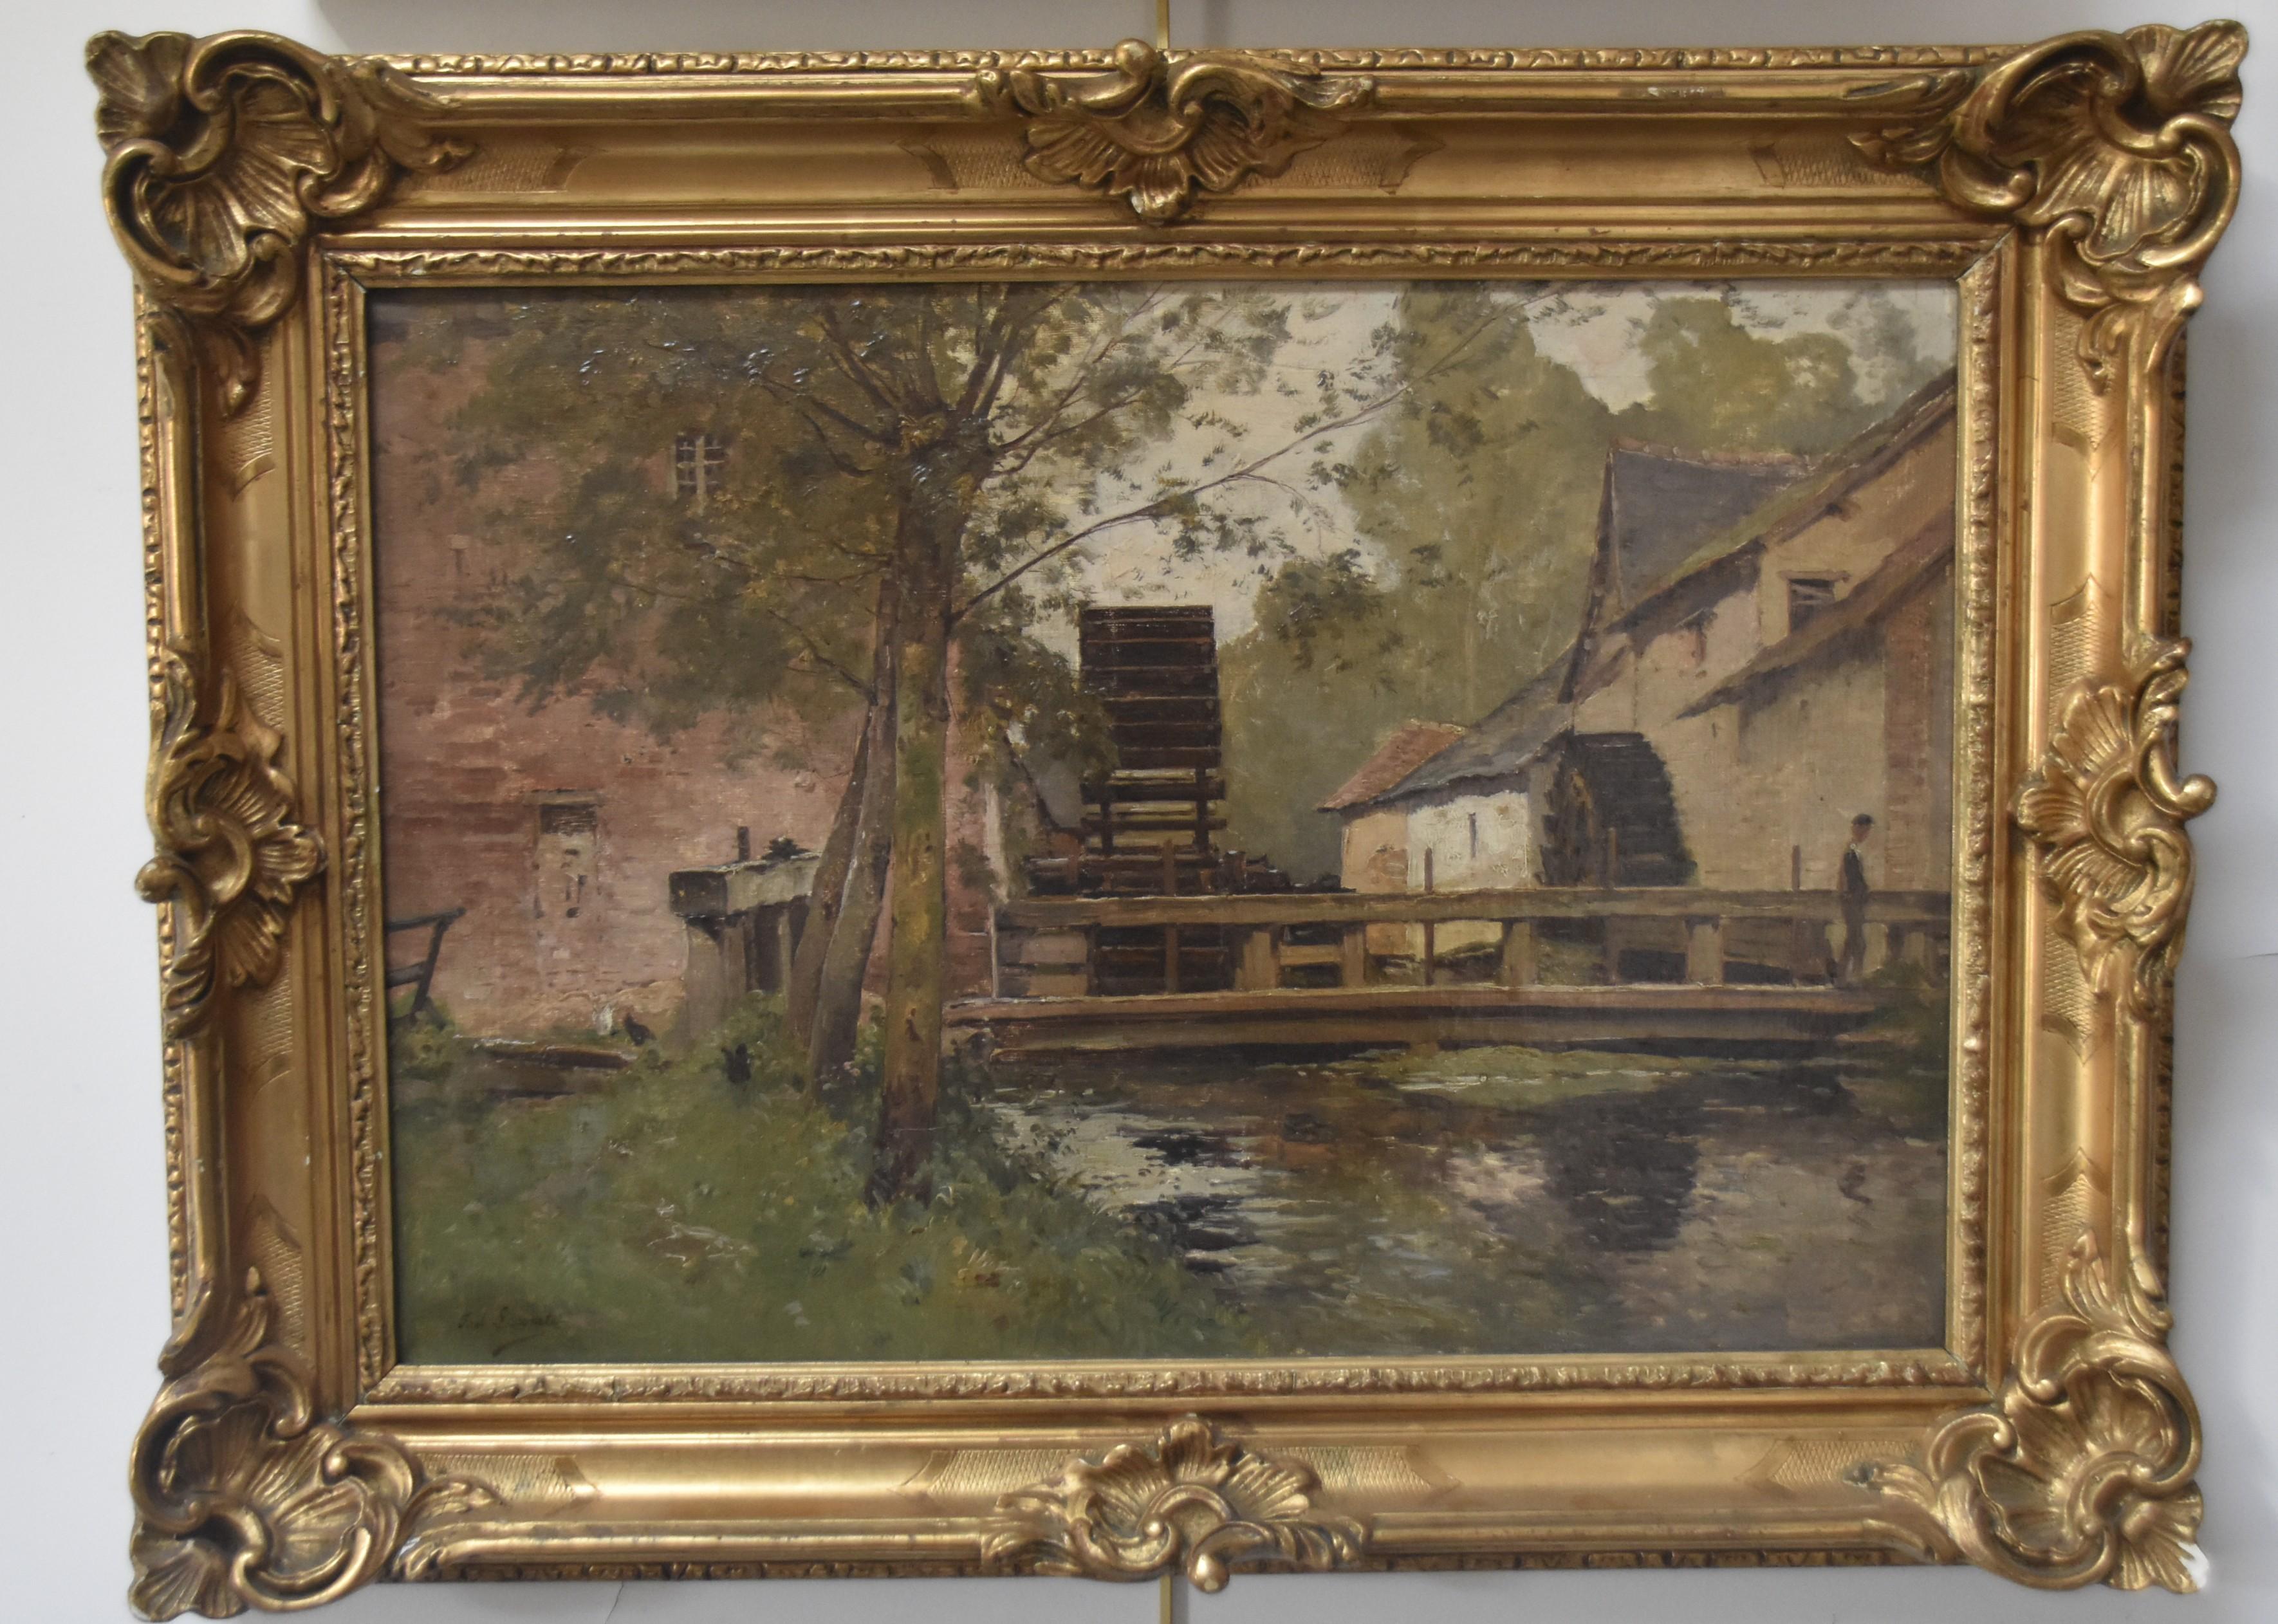 Paul Lecomte (1842-1920)
The Watermill
Signed on the lower left
Oil on canvas
38 x 55 cm
In good condition :  A trace of vertical stretcher visible under indirect light in the painting layer. Reparations visible on the reverse, but not perceptible